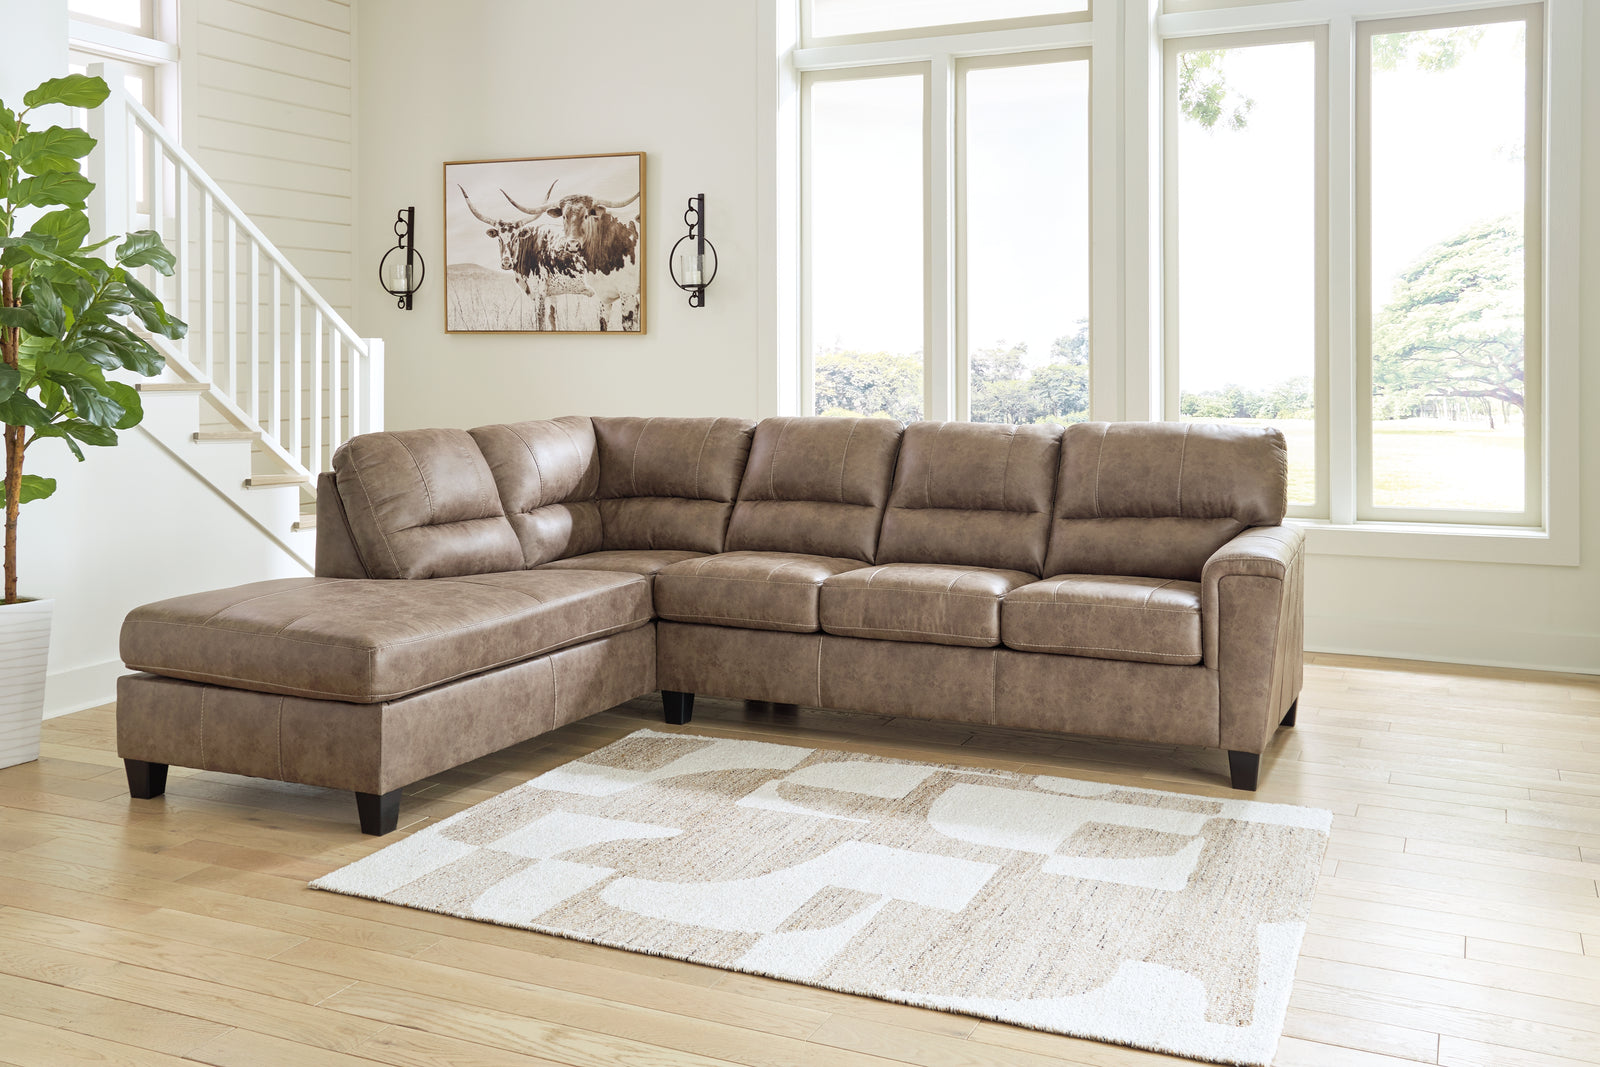 Navi Fossil Faux Leather 2-Piece Sectional Sofa Chaise